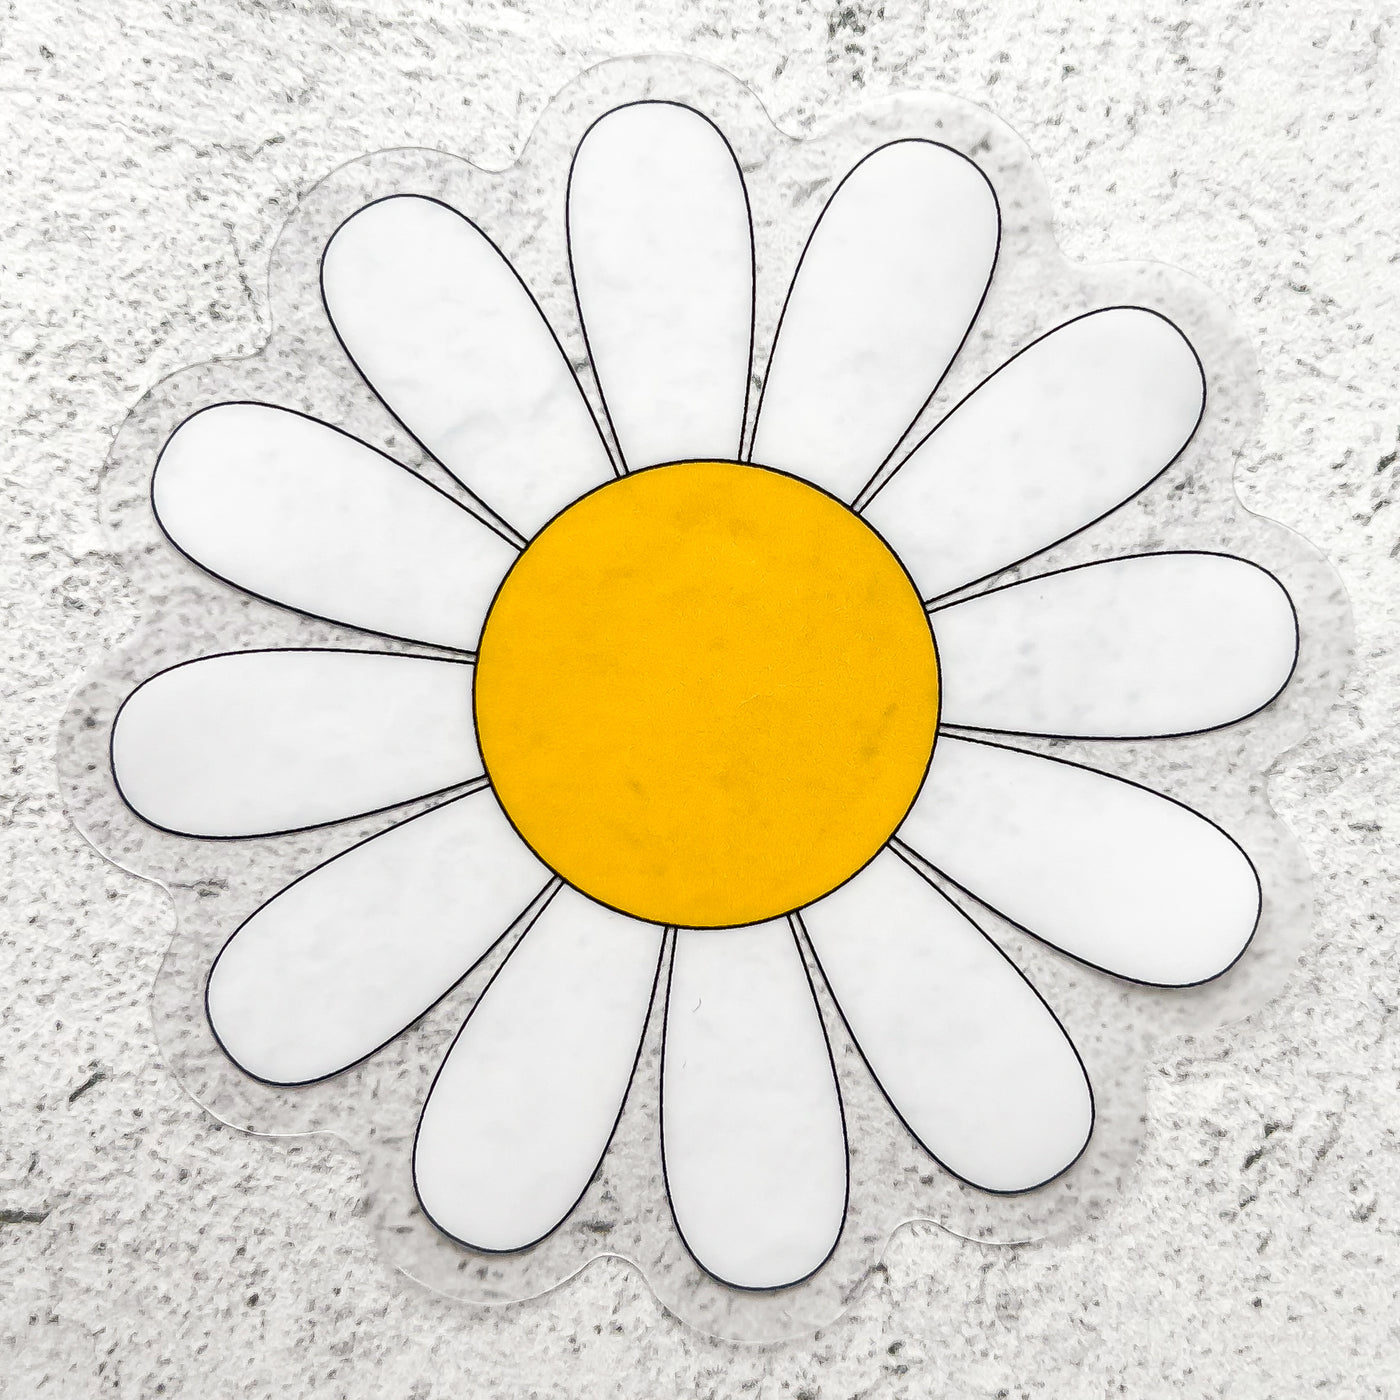 White daisy clear vinyl stickers waterproof by Simpliday Paper, Olga Nagorna.